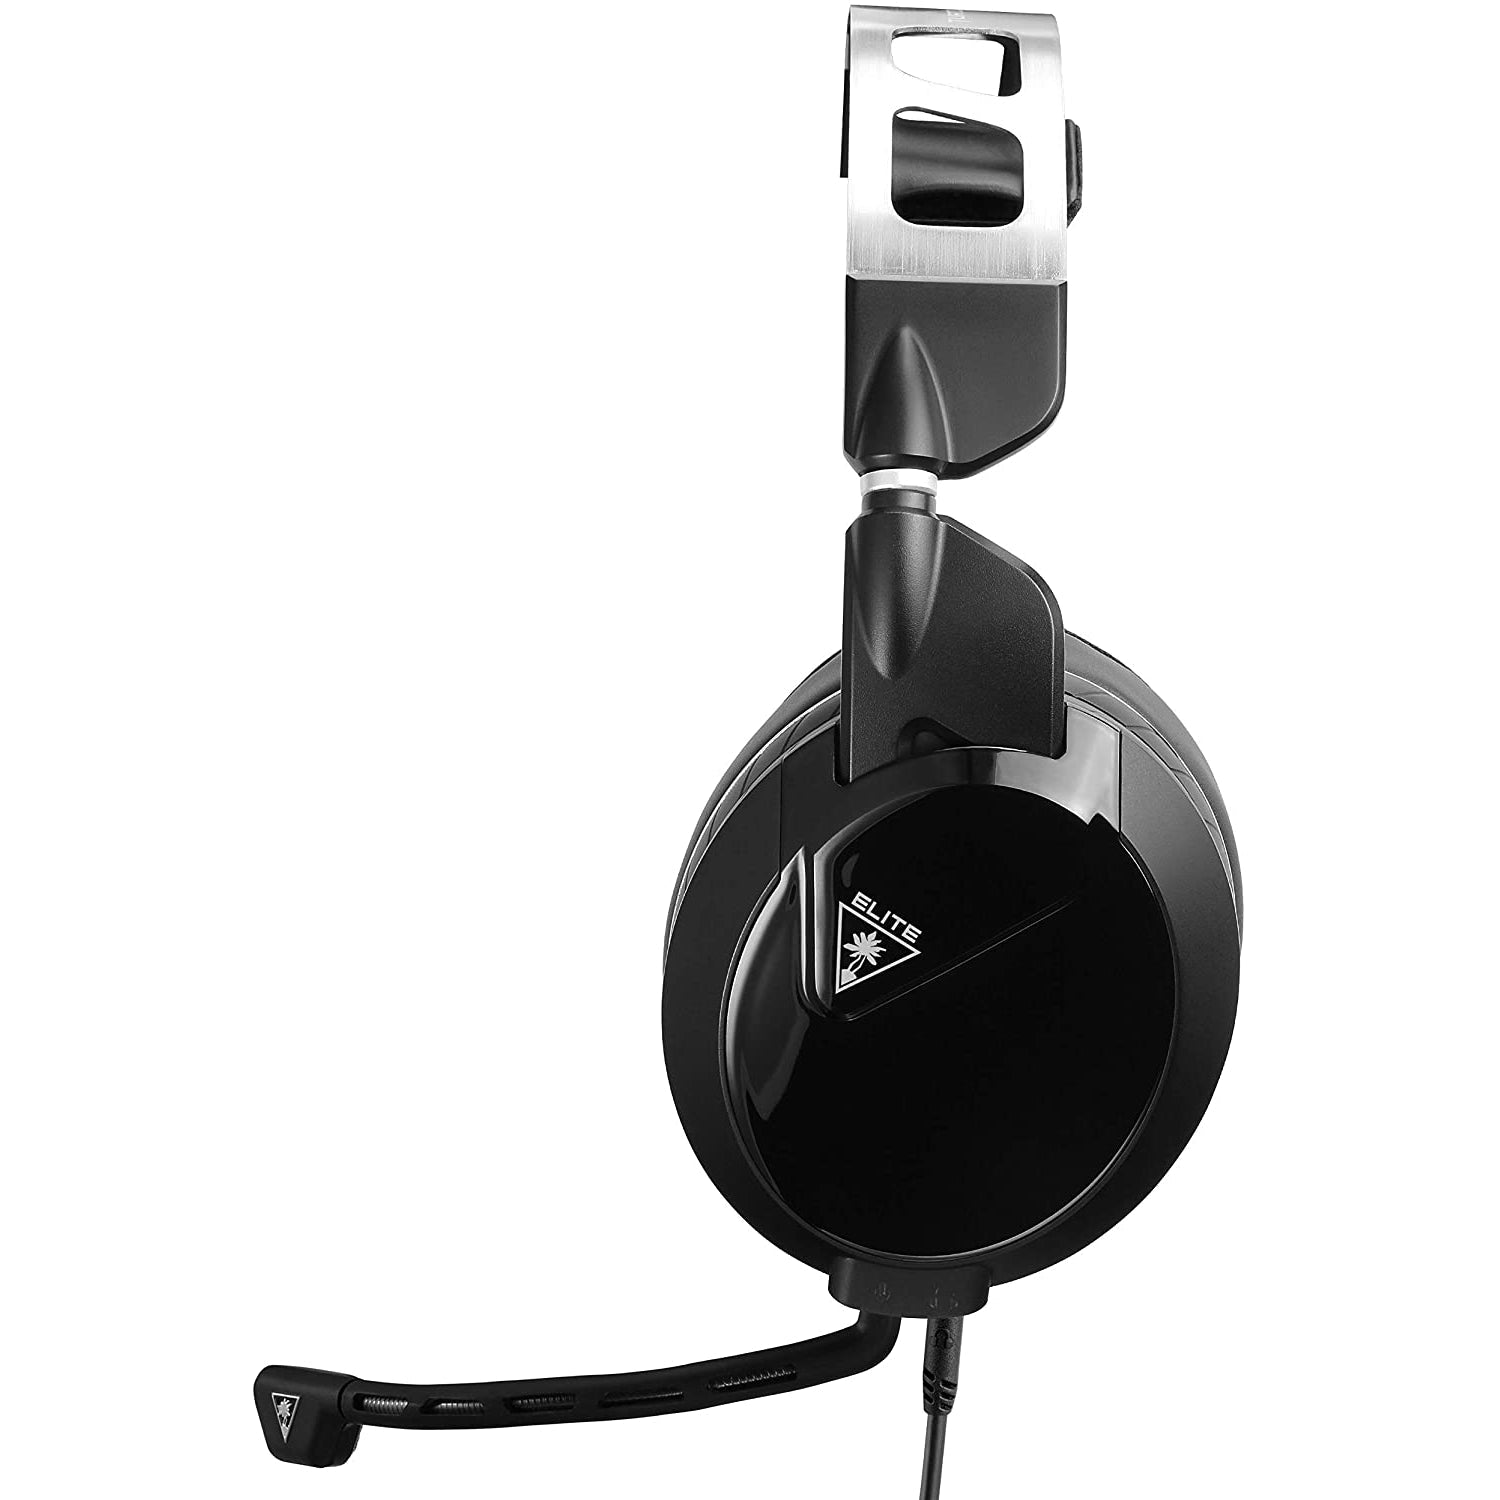 Turtle Beach Elite Pro 2 Gaming Headset and SuperAmp (PS4/PC) - New